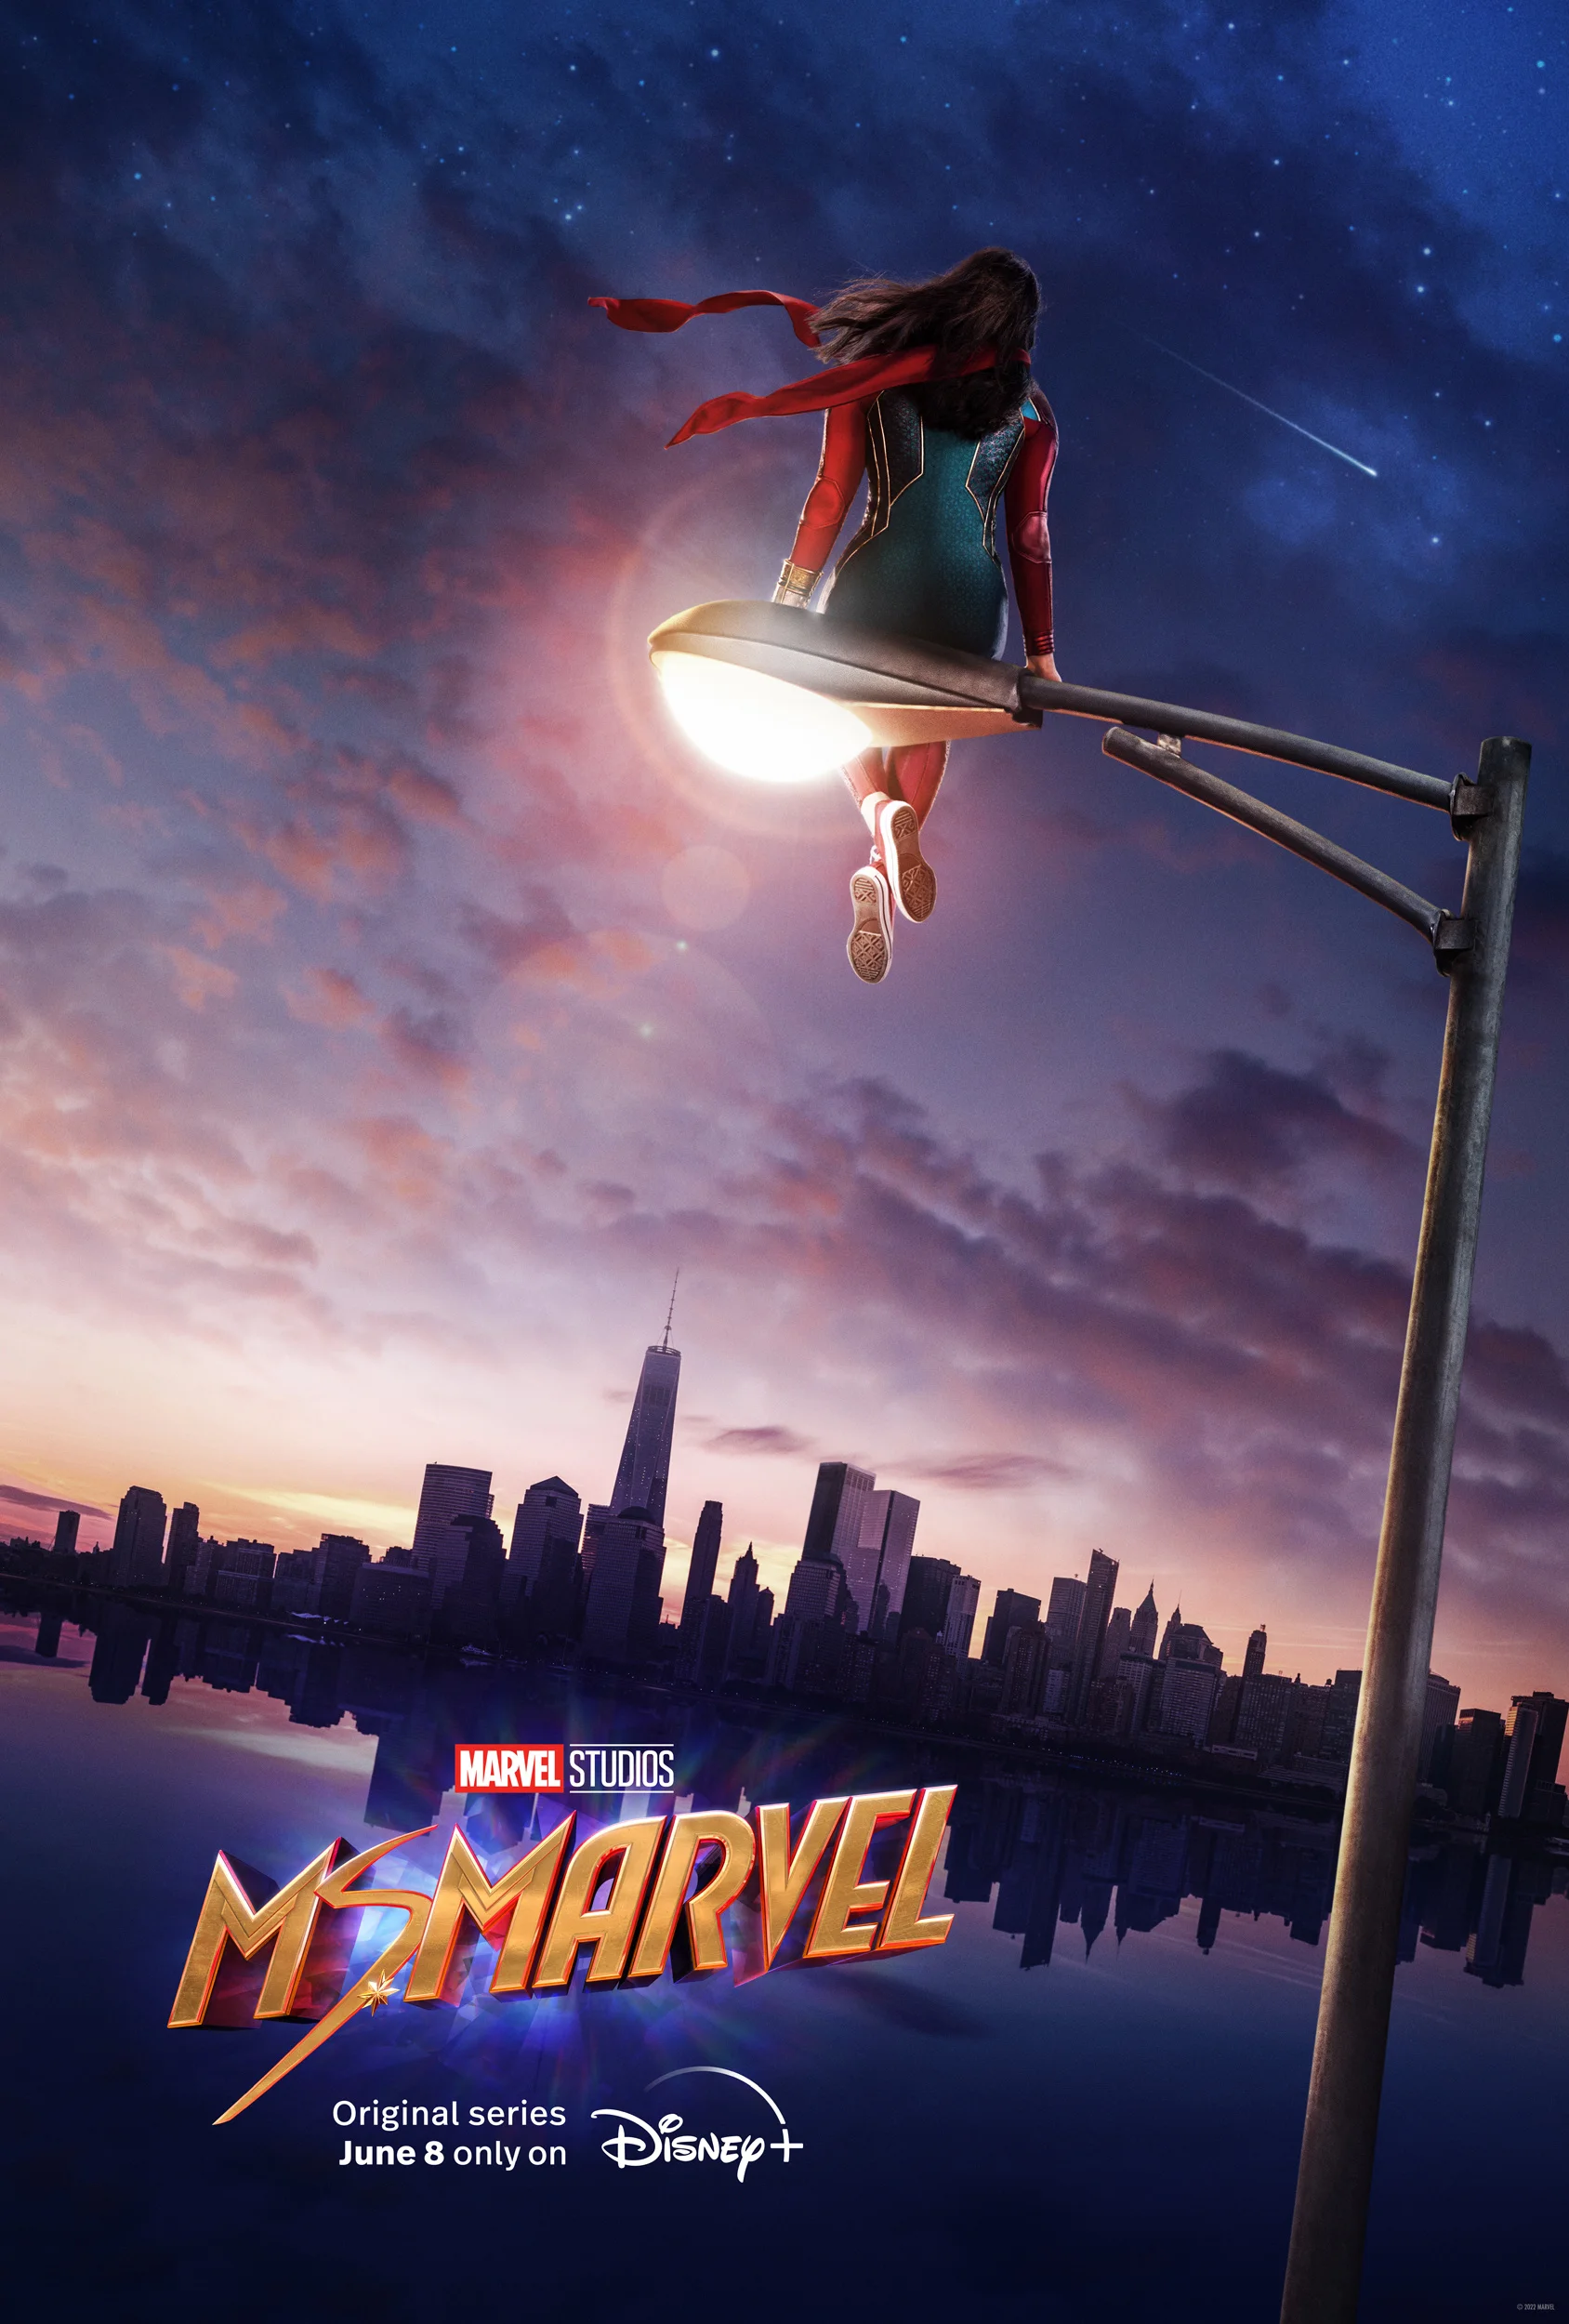 Marvel's new drama "Ms. Marvel" released official trailer and poster, it will be launched on June 8th